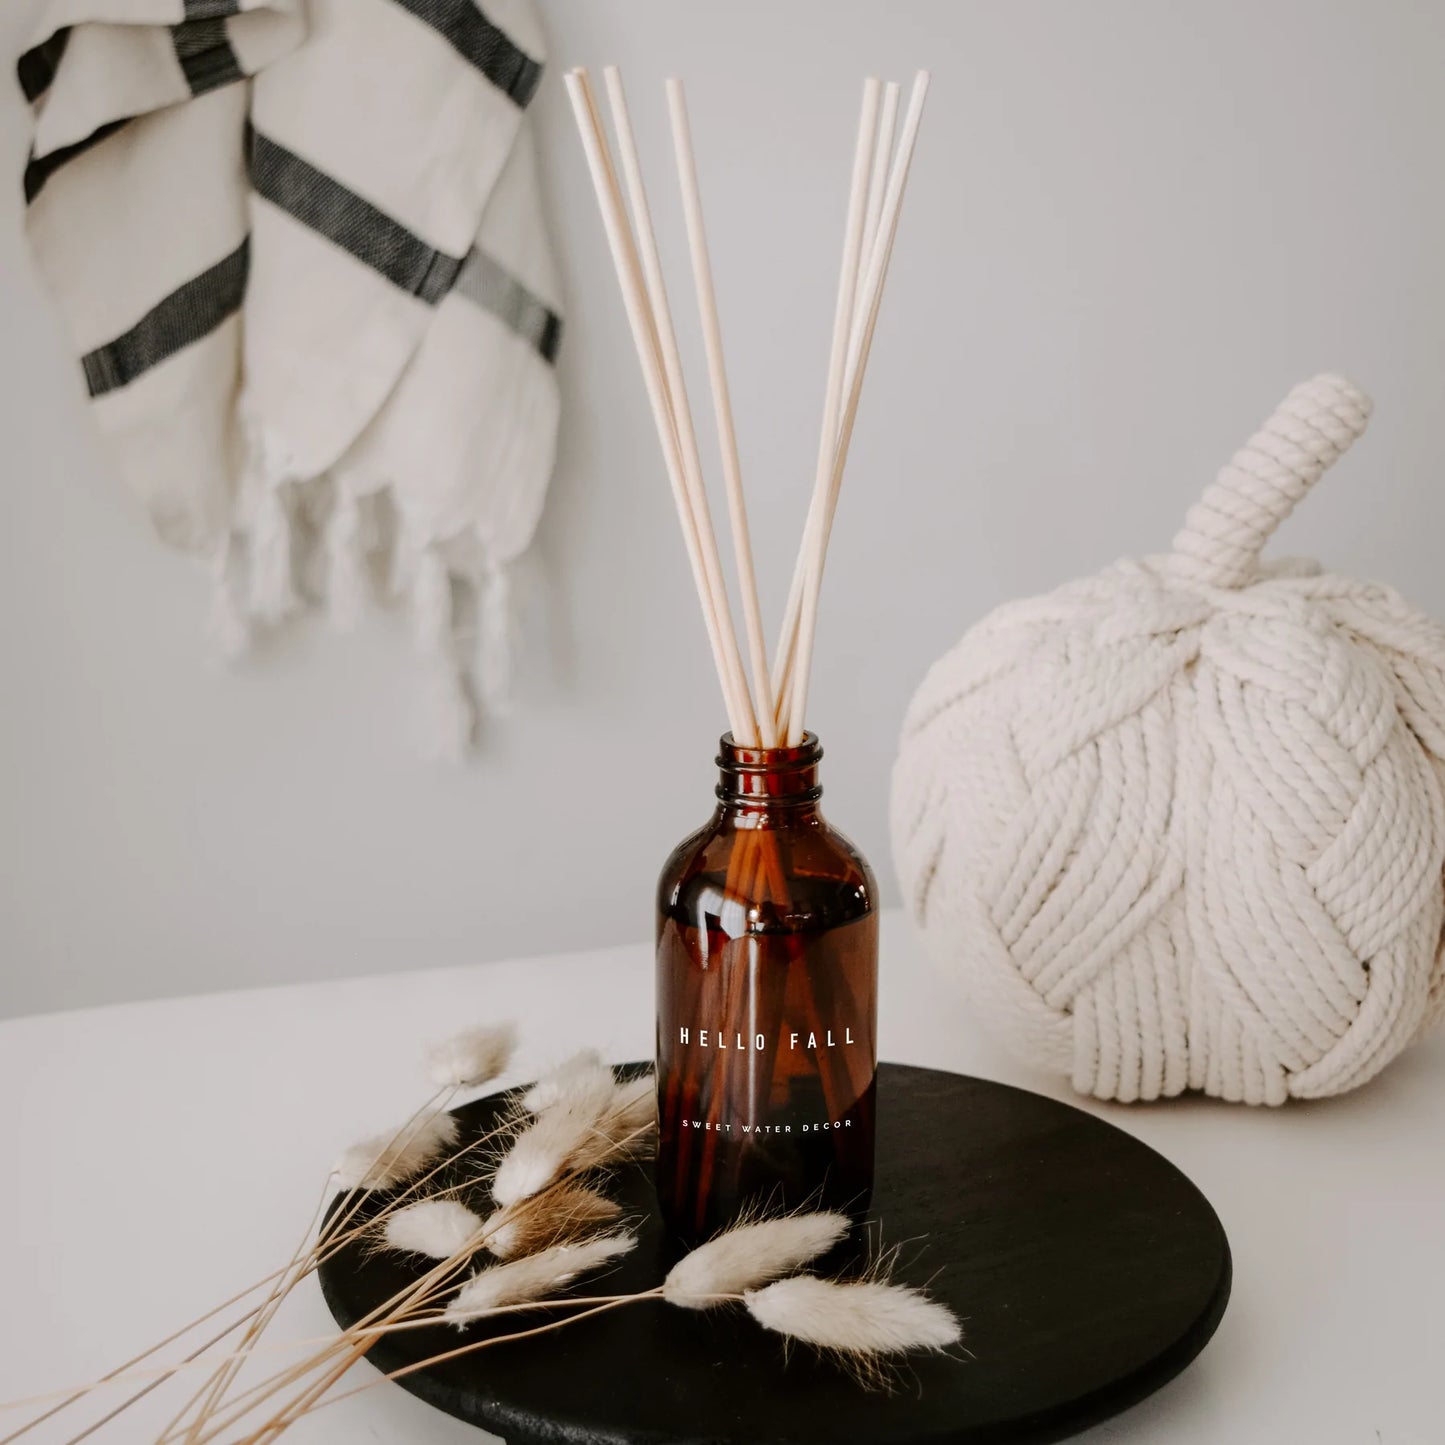 Hello Fall Reed Diffuser